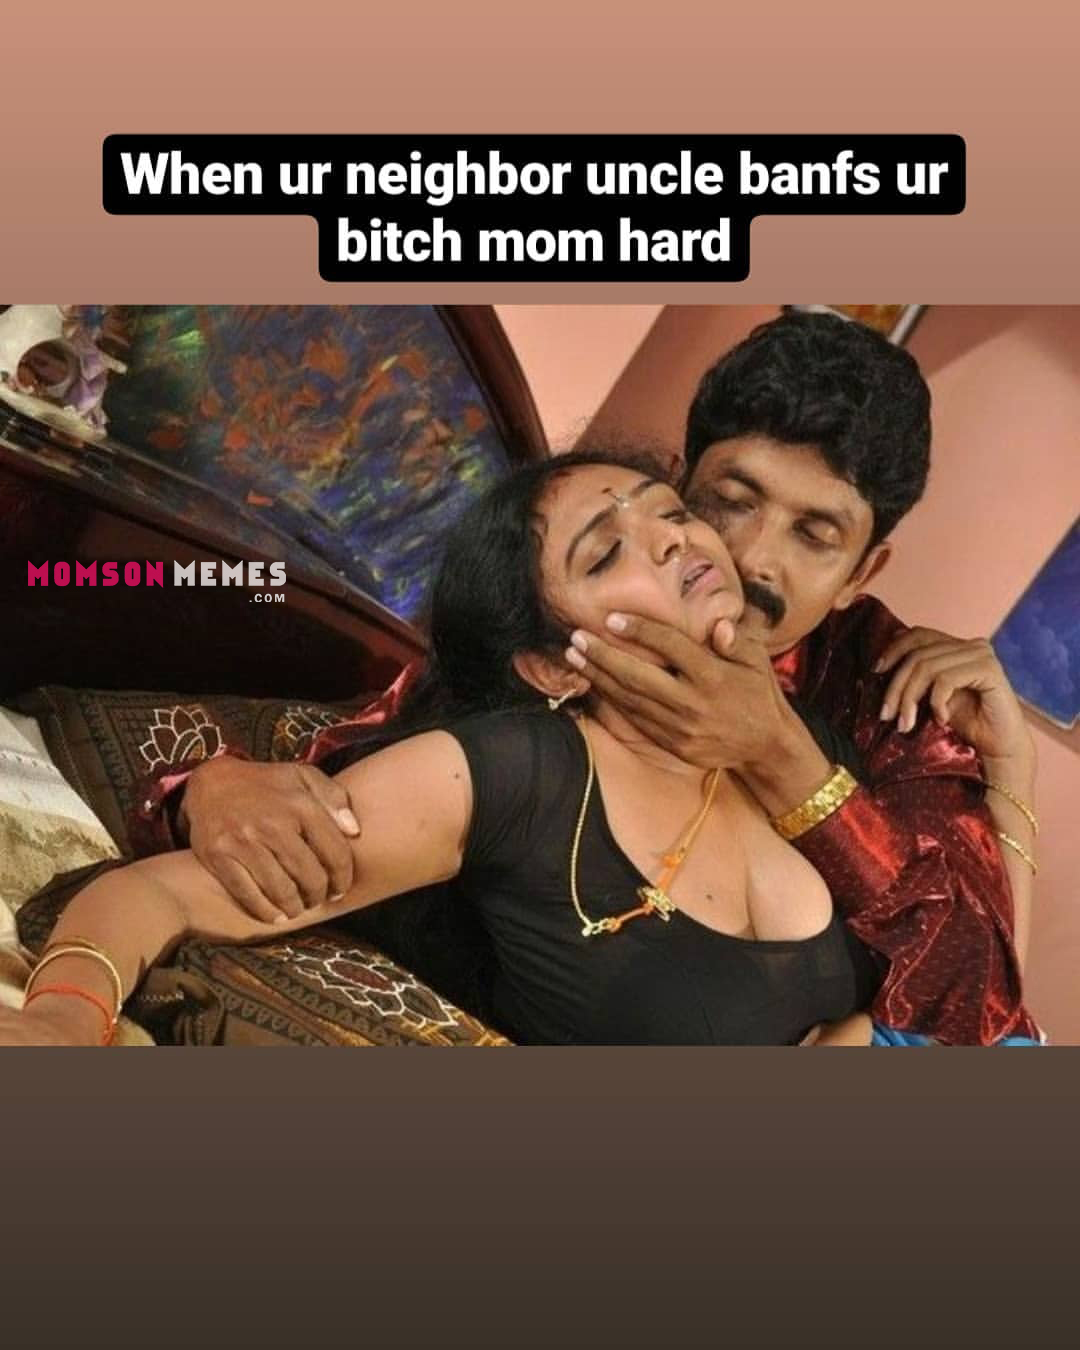 When your neighbour uncle bangs your mom!